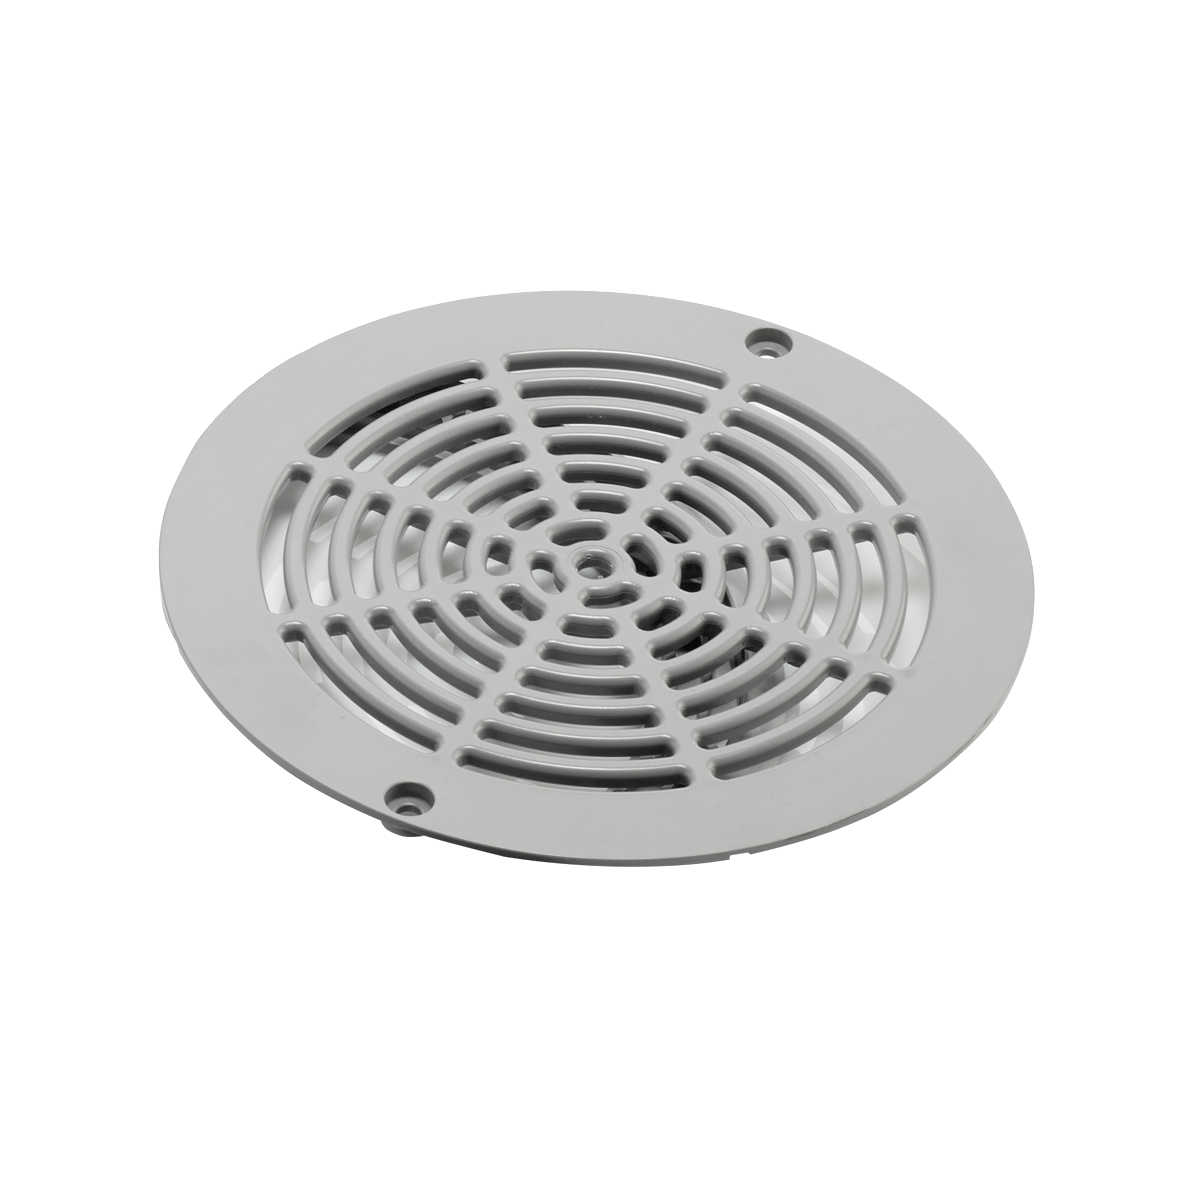 Ocean® grid cover for main drain M5 and PT ABS grey Ocean® grid cover for main drain M5 and PT ABS grey